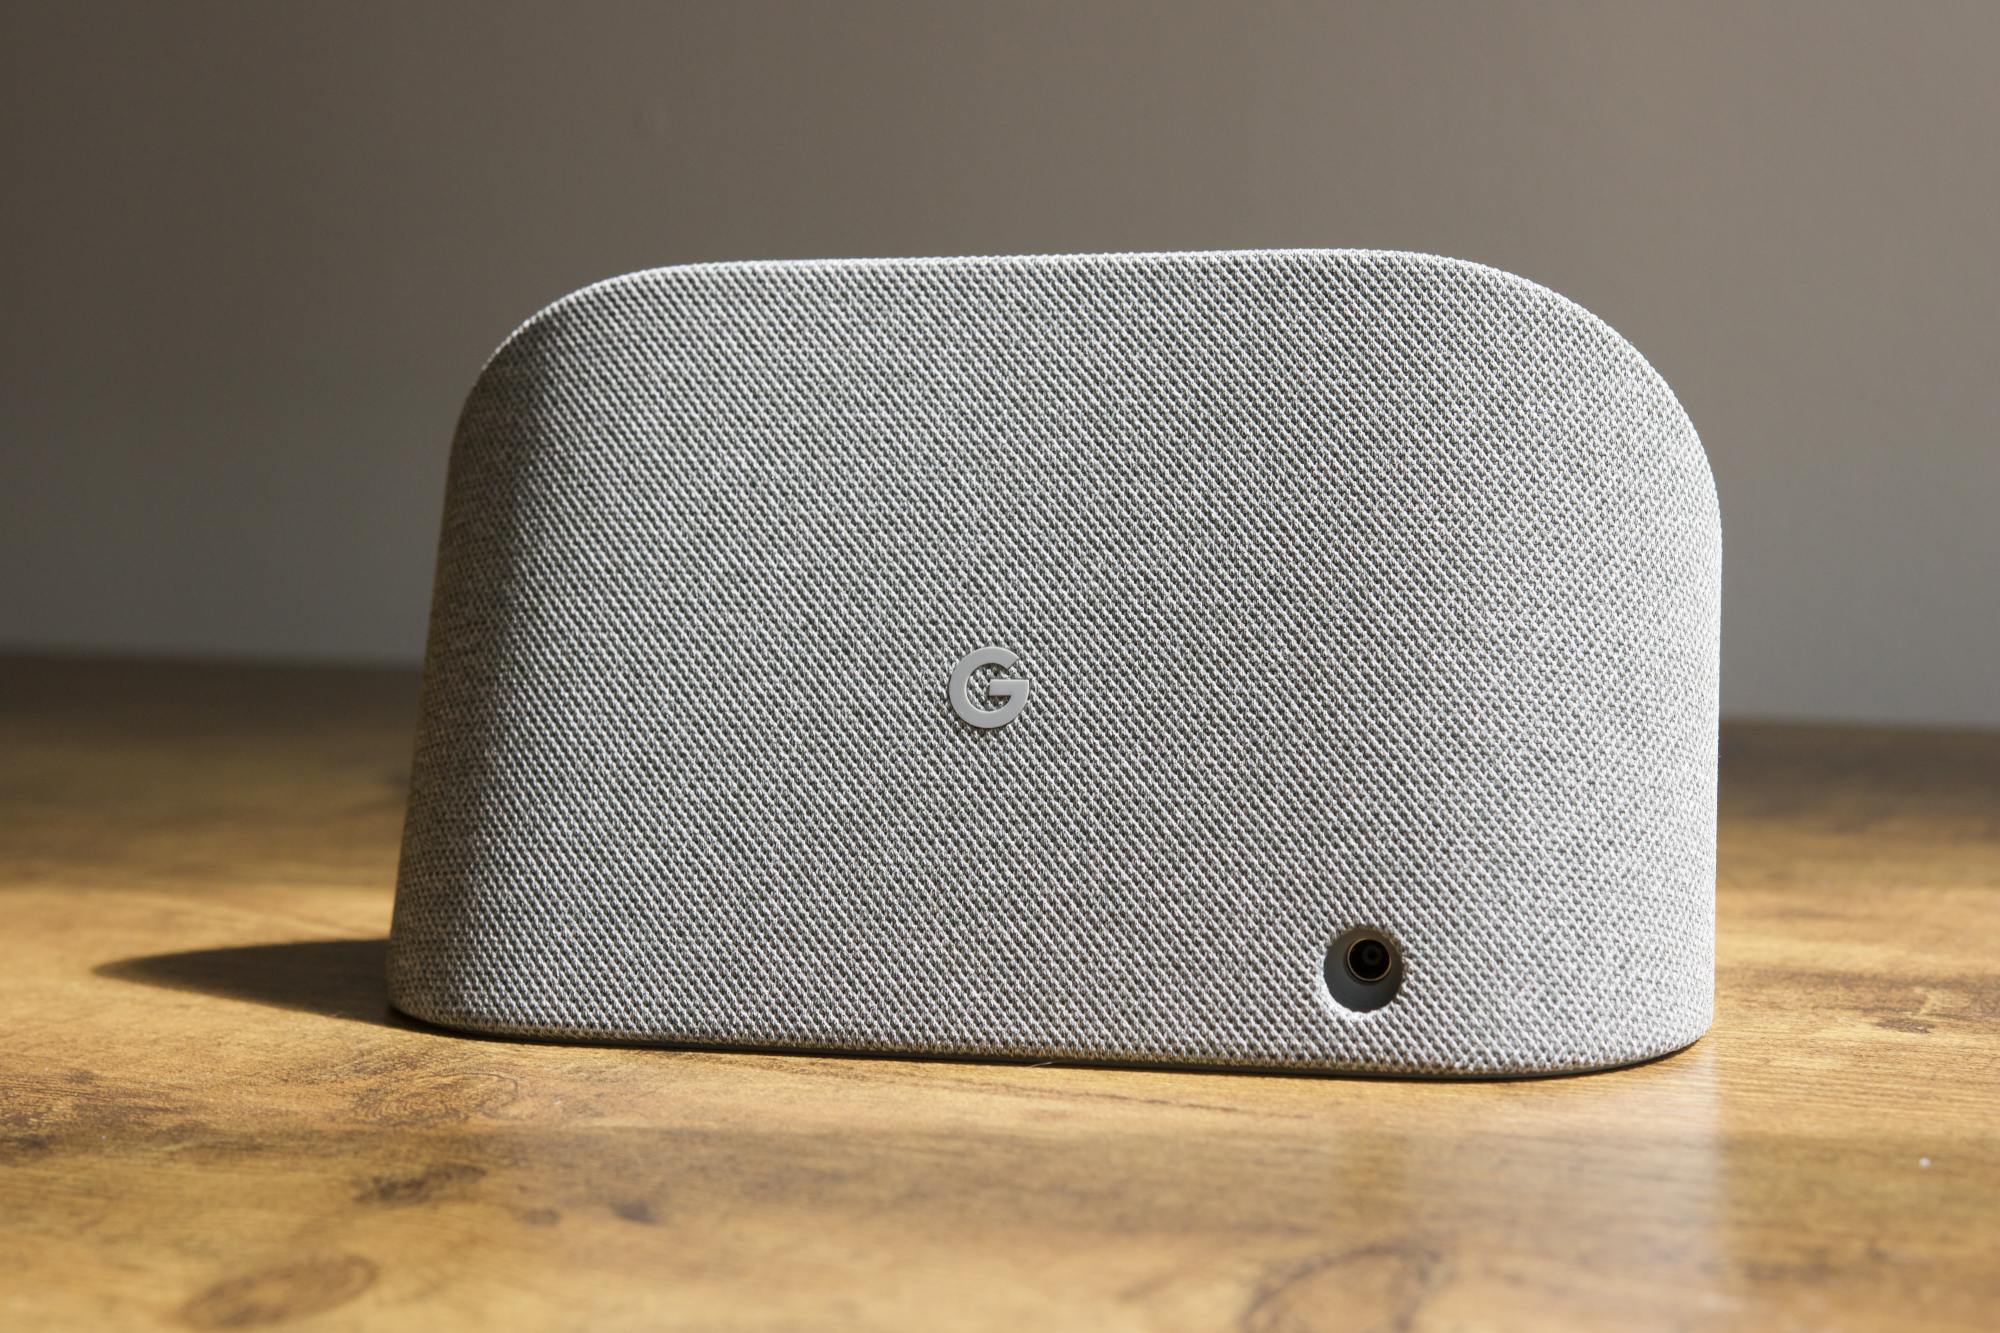 The rear of the charging dock for the Google Pixel Tablet.